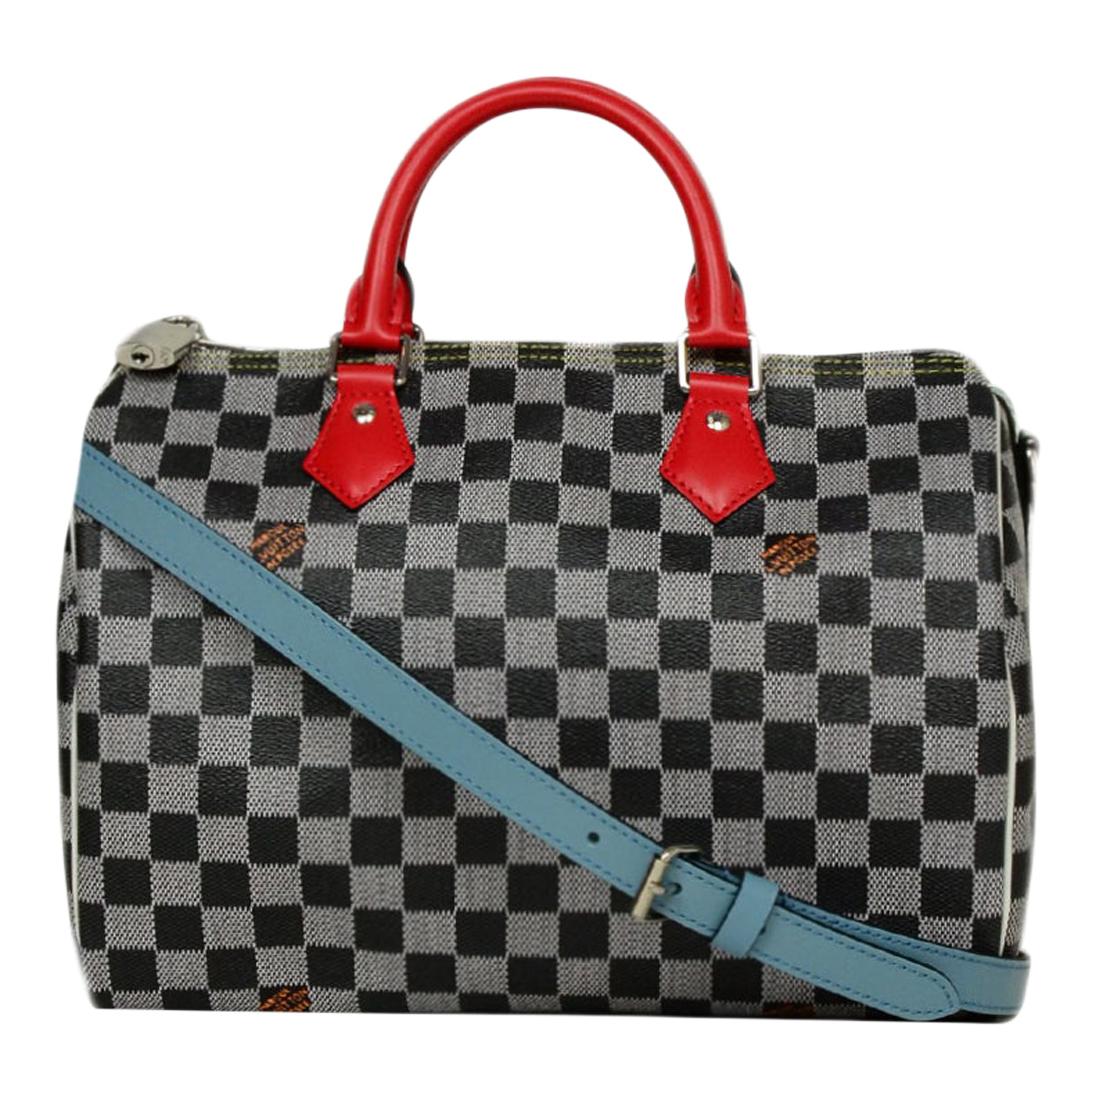 LOUIS VUITTON - Speedy Bandouliere Bag Limited Edition